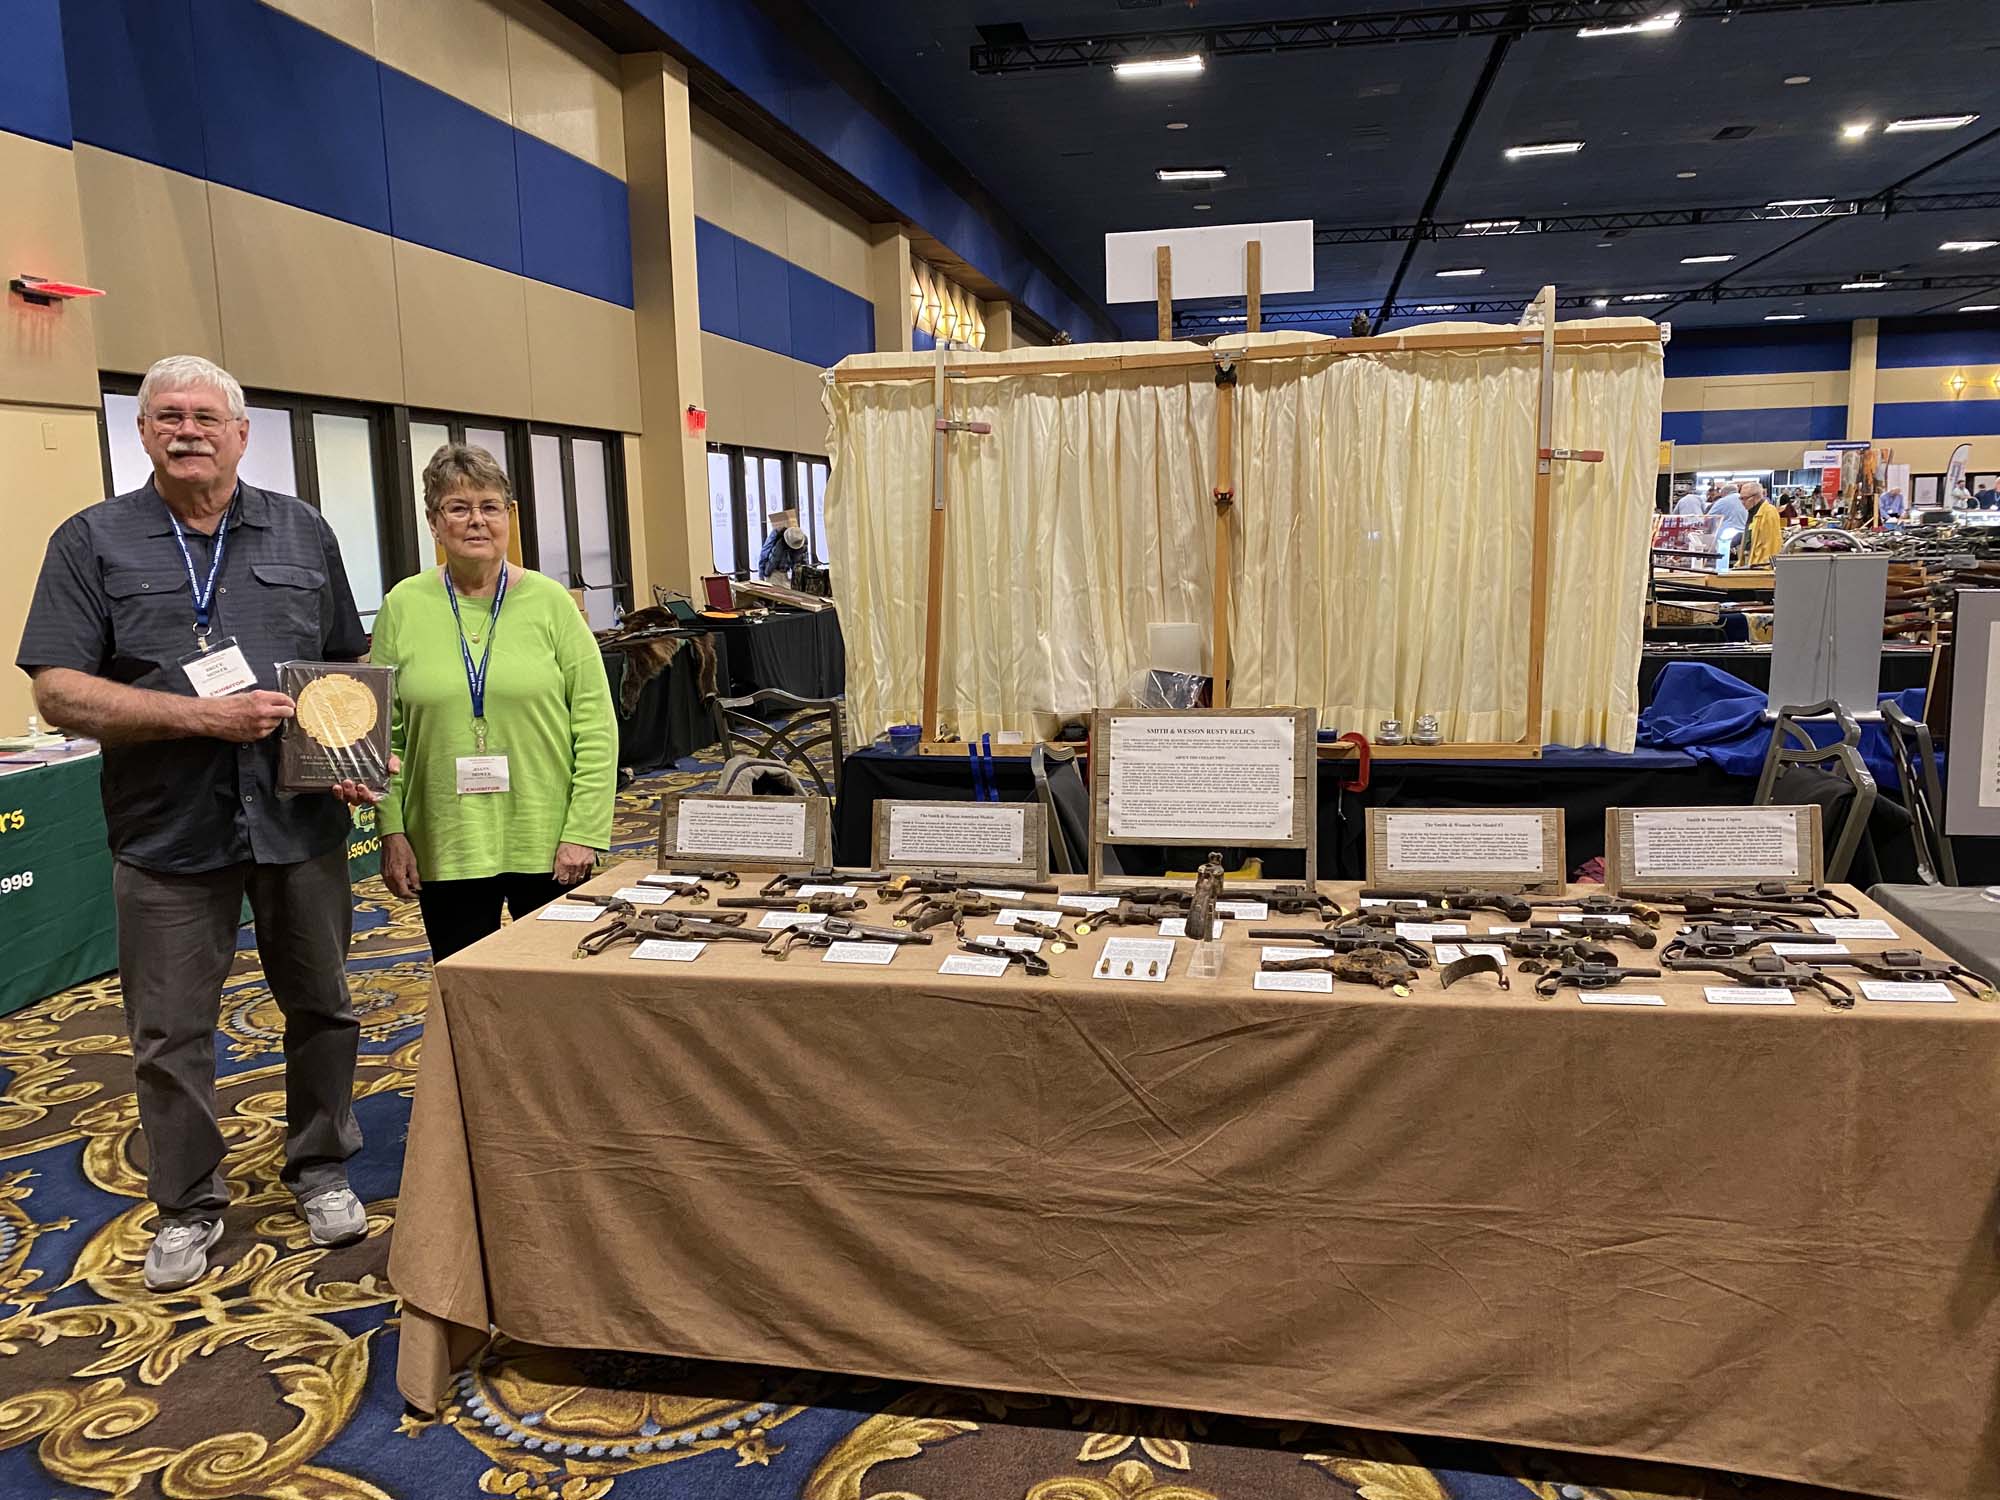 25th Annual NRA National Gun Collectors Show Awards - Bruce & JoAnn Mower - Best S&W Exhibit